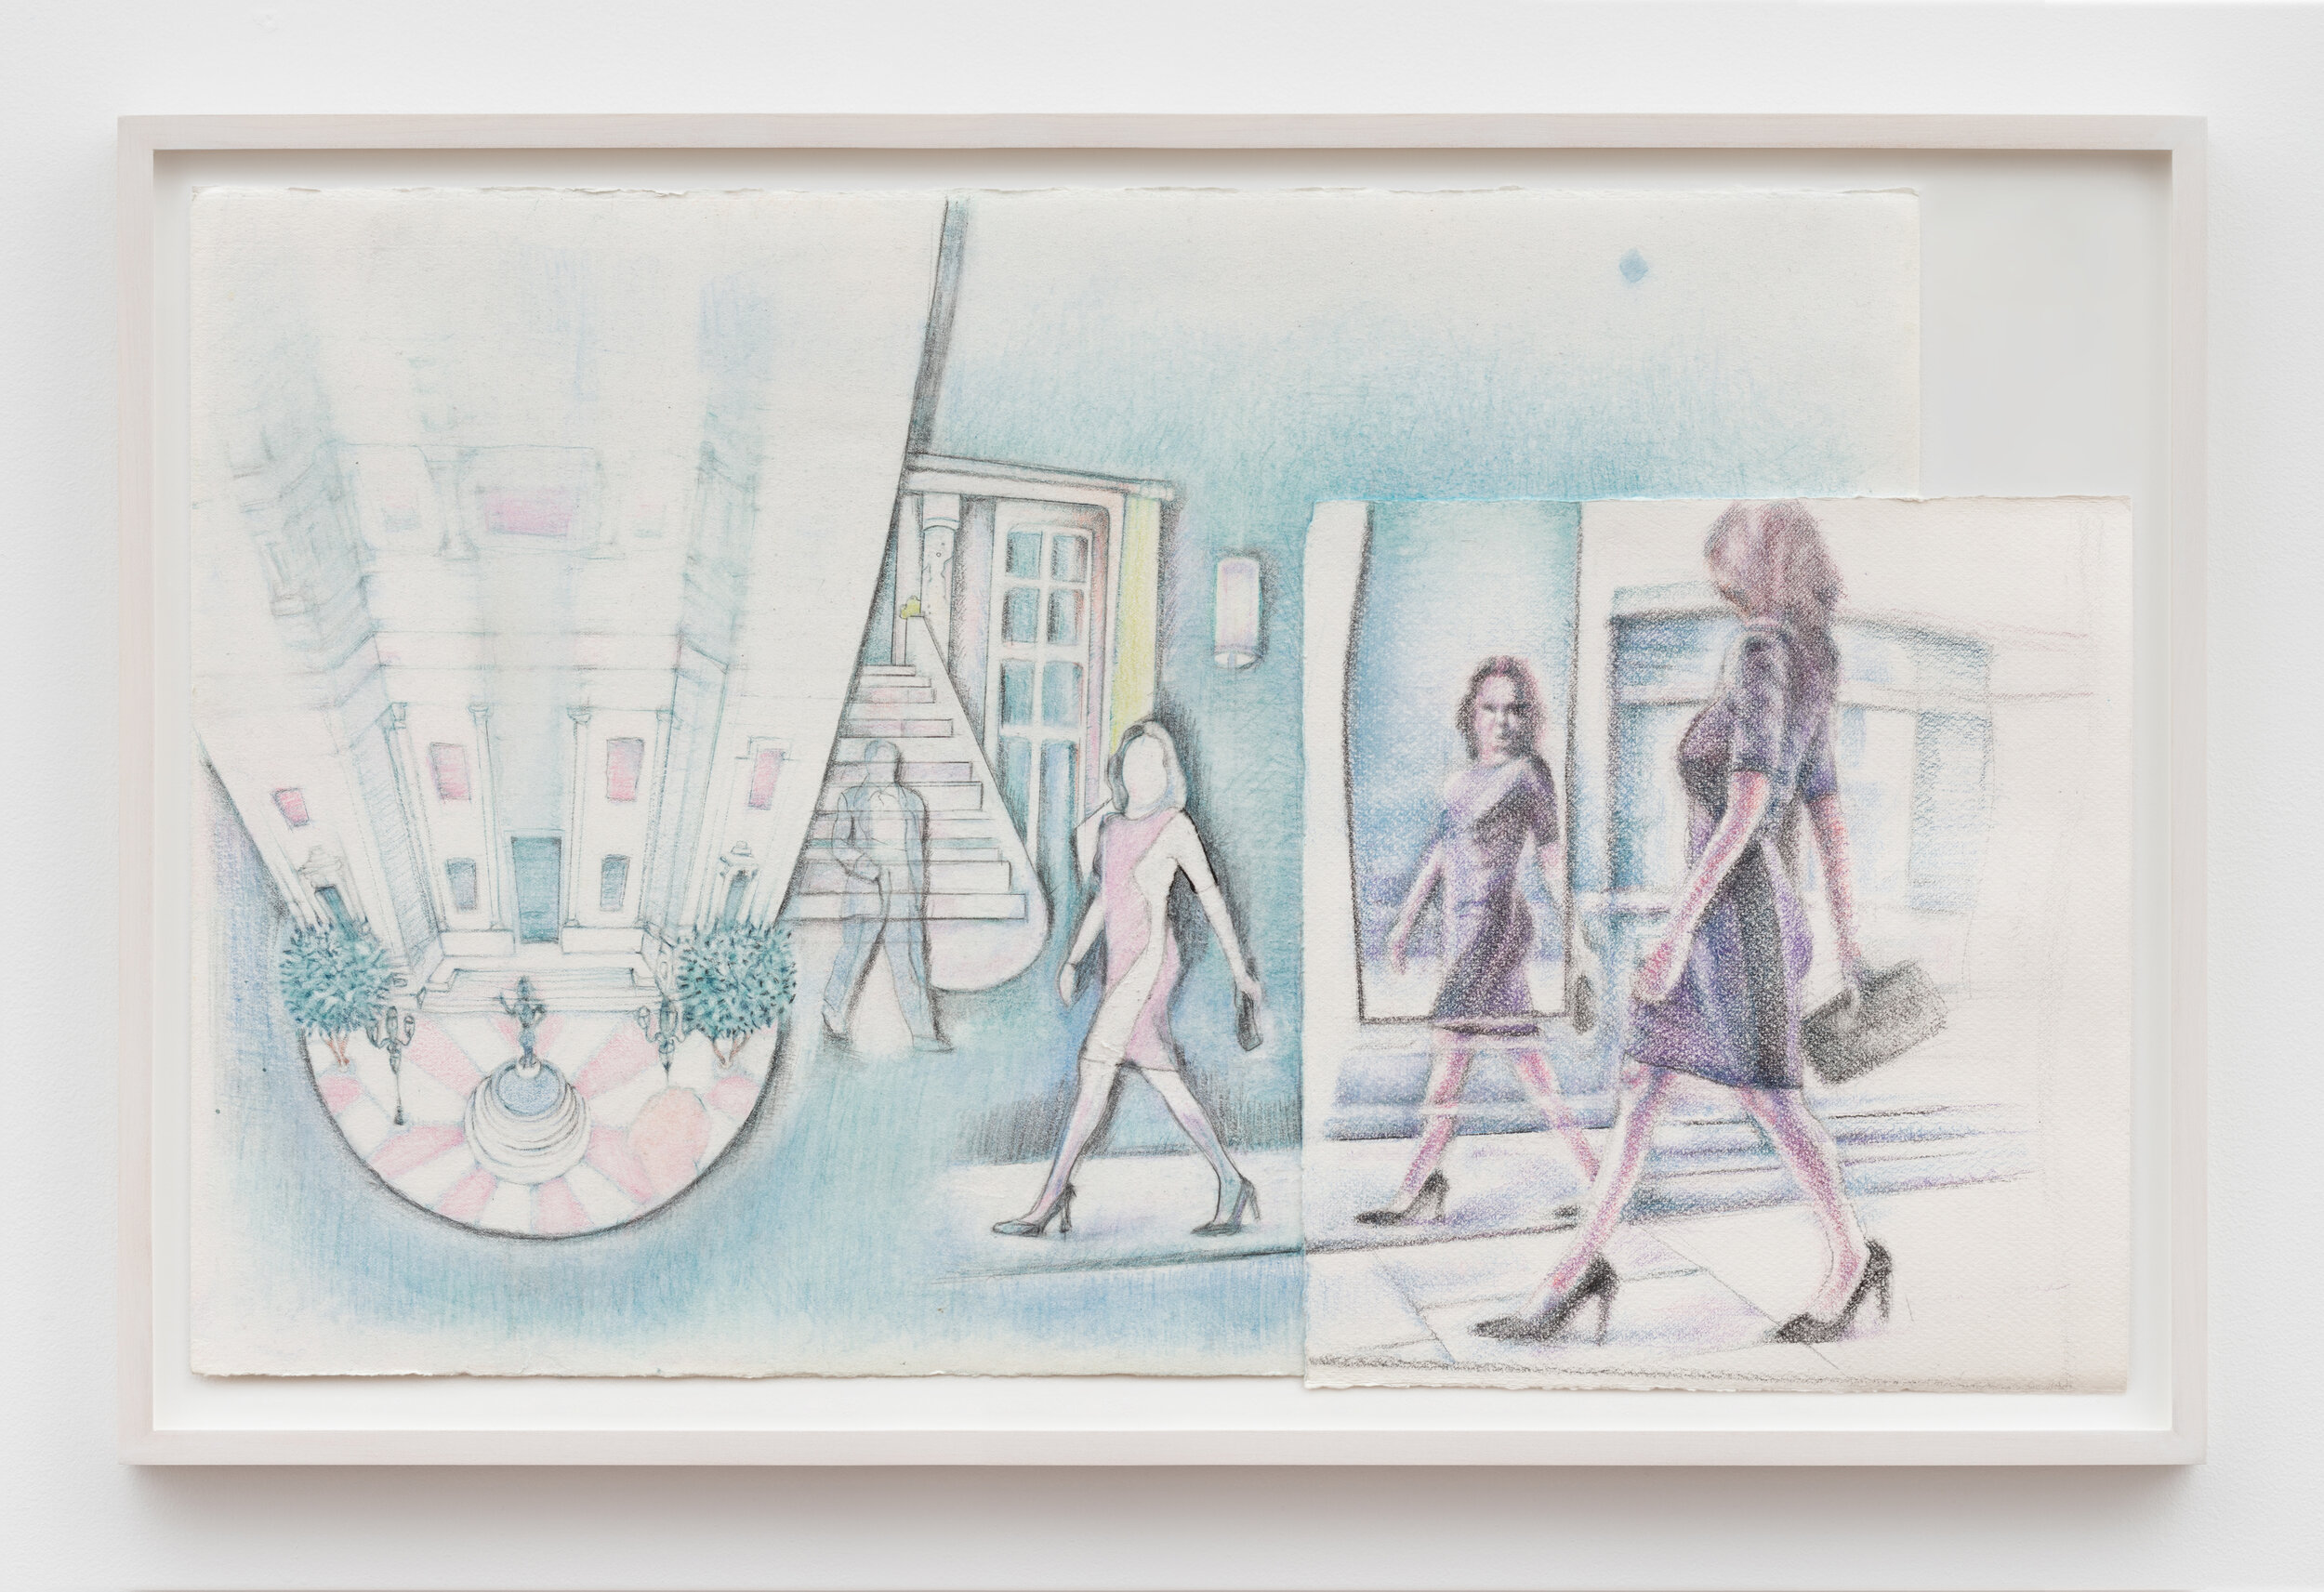  Marlene Frontera,  From Ivette’s to the Diamants’,  2020. Color pencil and gouache on paper. 18.5 x 23.75 inches. 